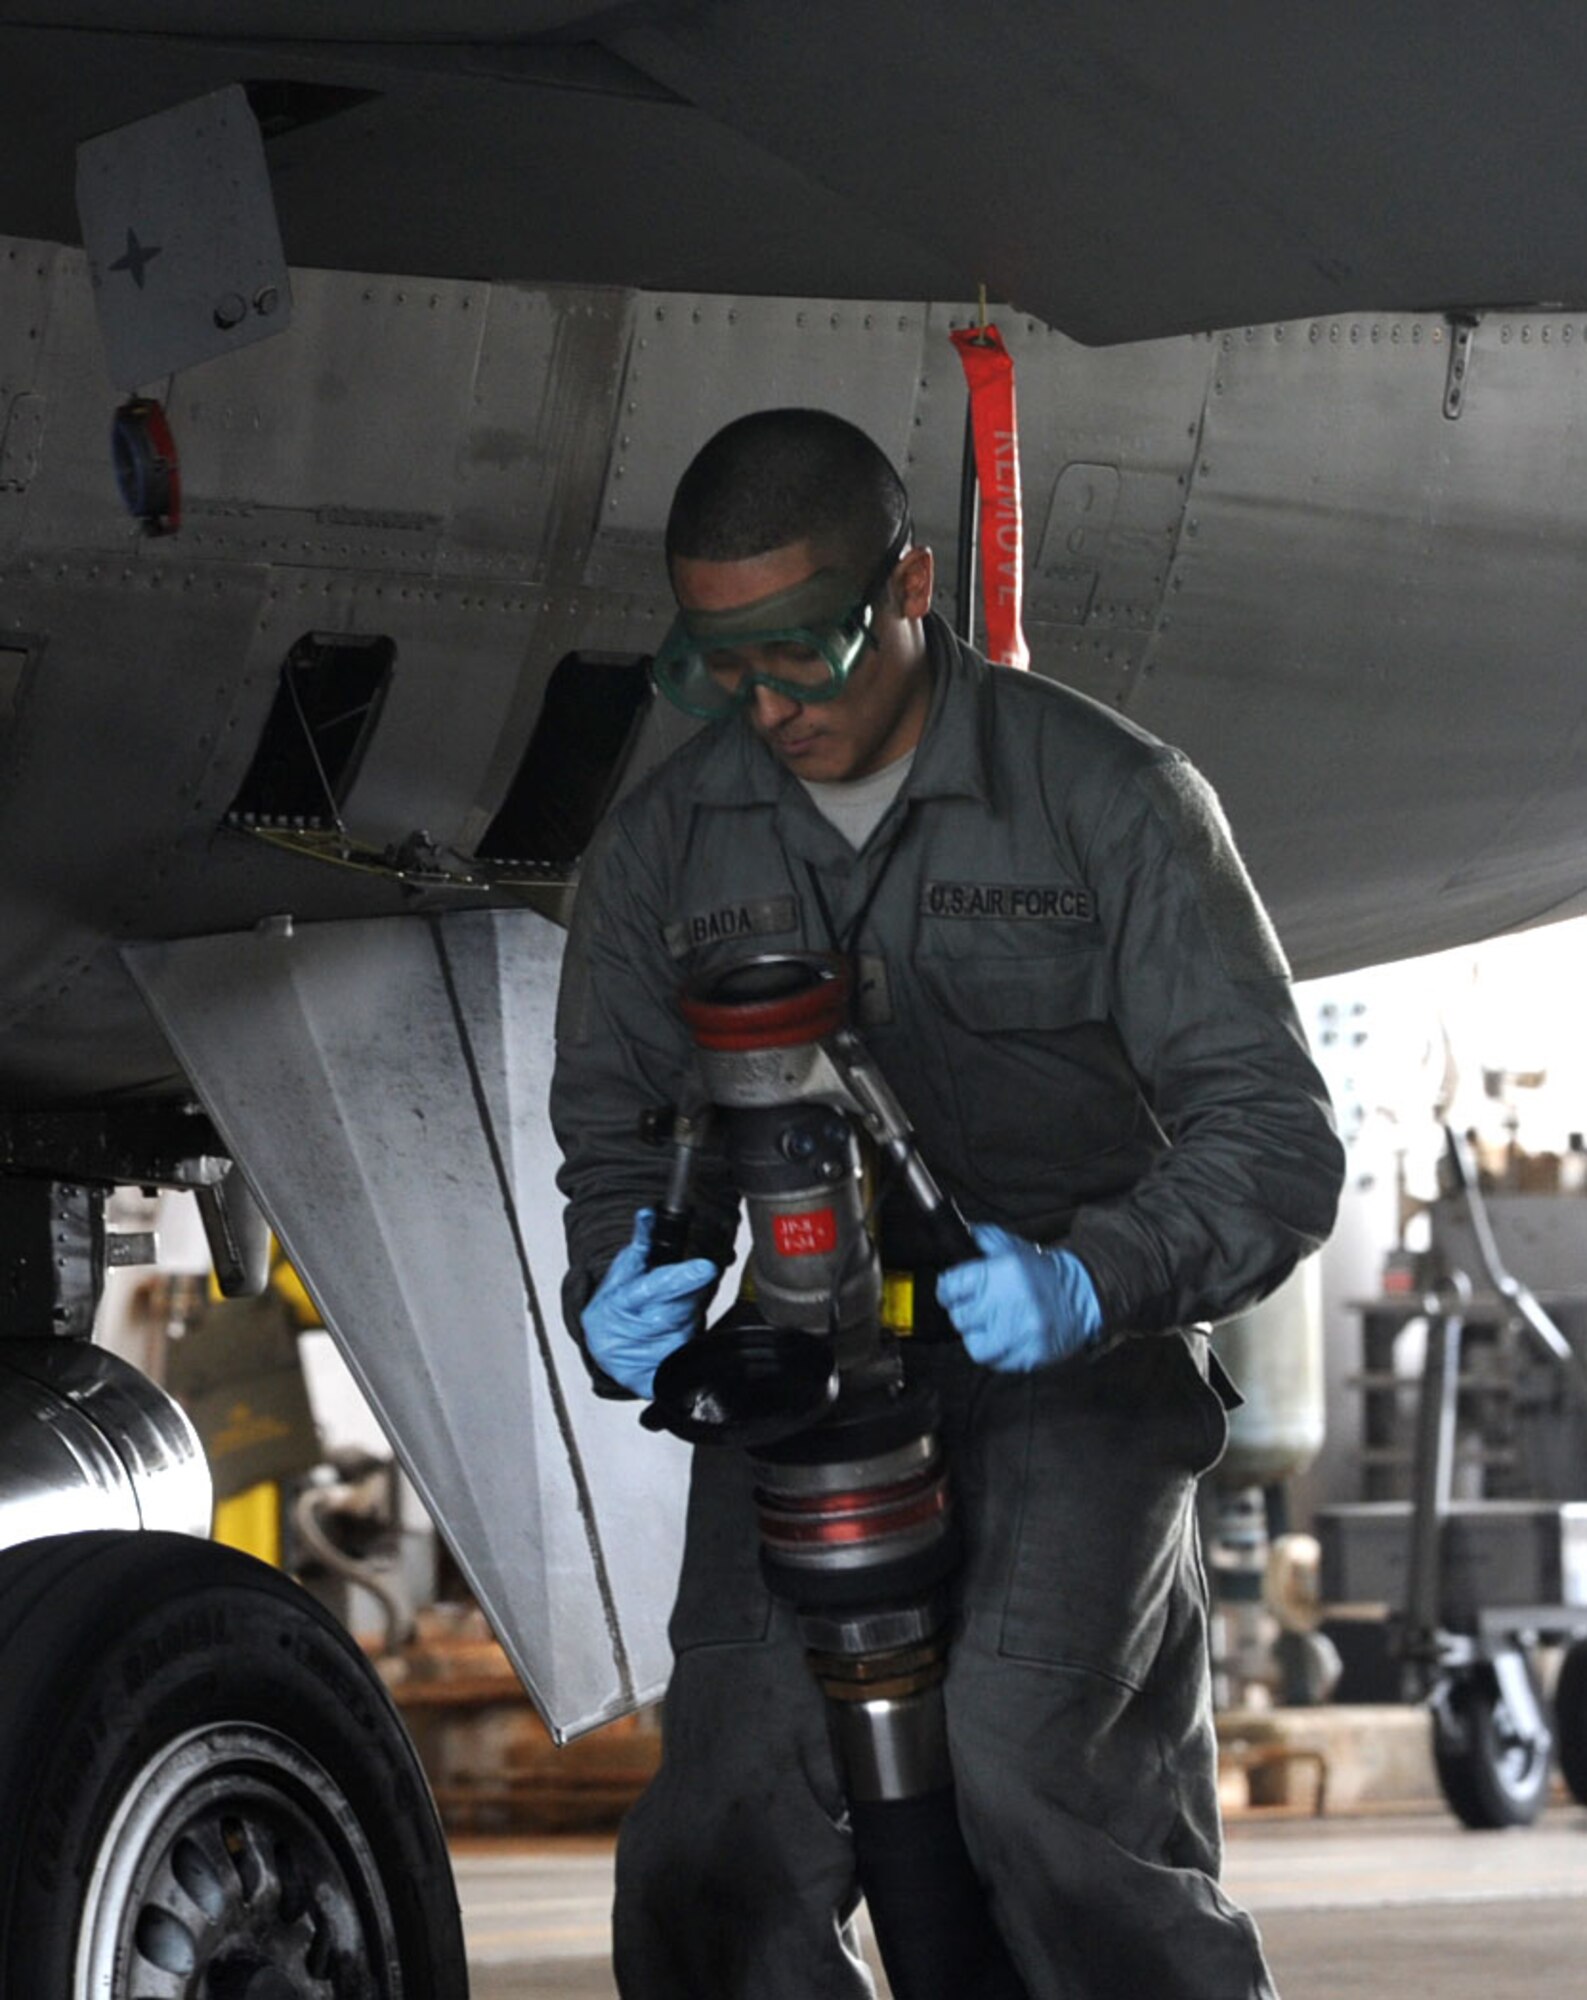 U.S. Air Force Airman 1st Class Geanny Bada, 14th Aircraft Maintenance Unit crew chief, refuels an F-16 Fighting Falcon aircraft during Keen Sword 2013 at Misawa Air Base, Japan, Nov. 8, 2012. The biennial exercise builds builateral confidence and strengthens working relationships between the U.S. and Japan’s military forces. (U.S. Air Force photo by Airman 1st Class Kenna Jackson)